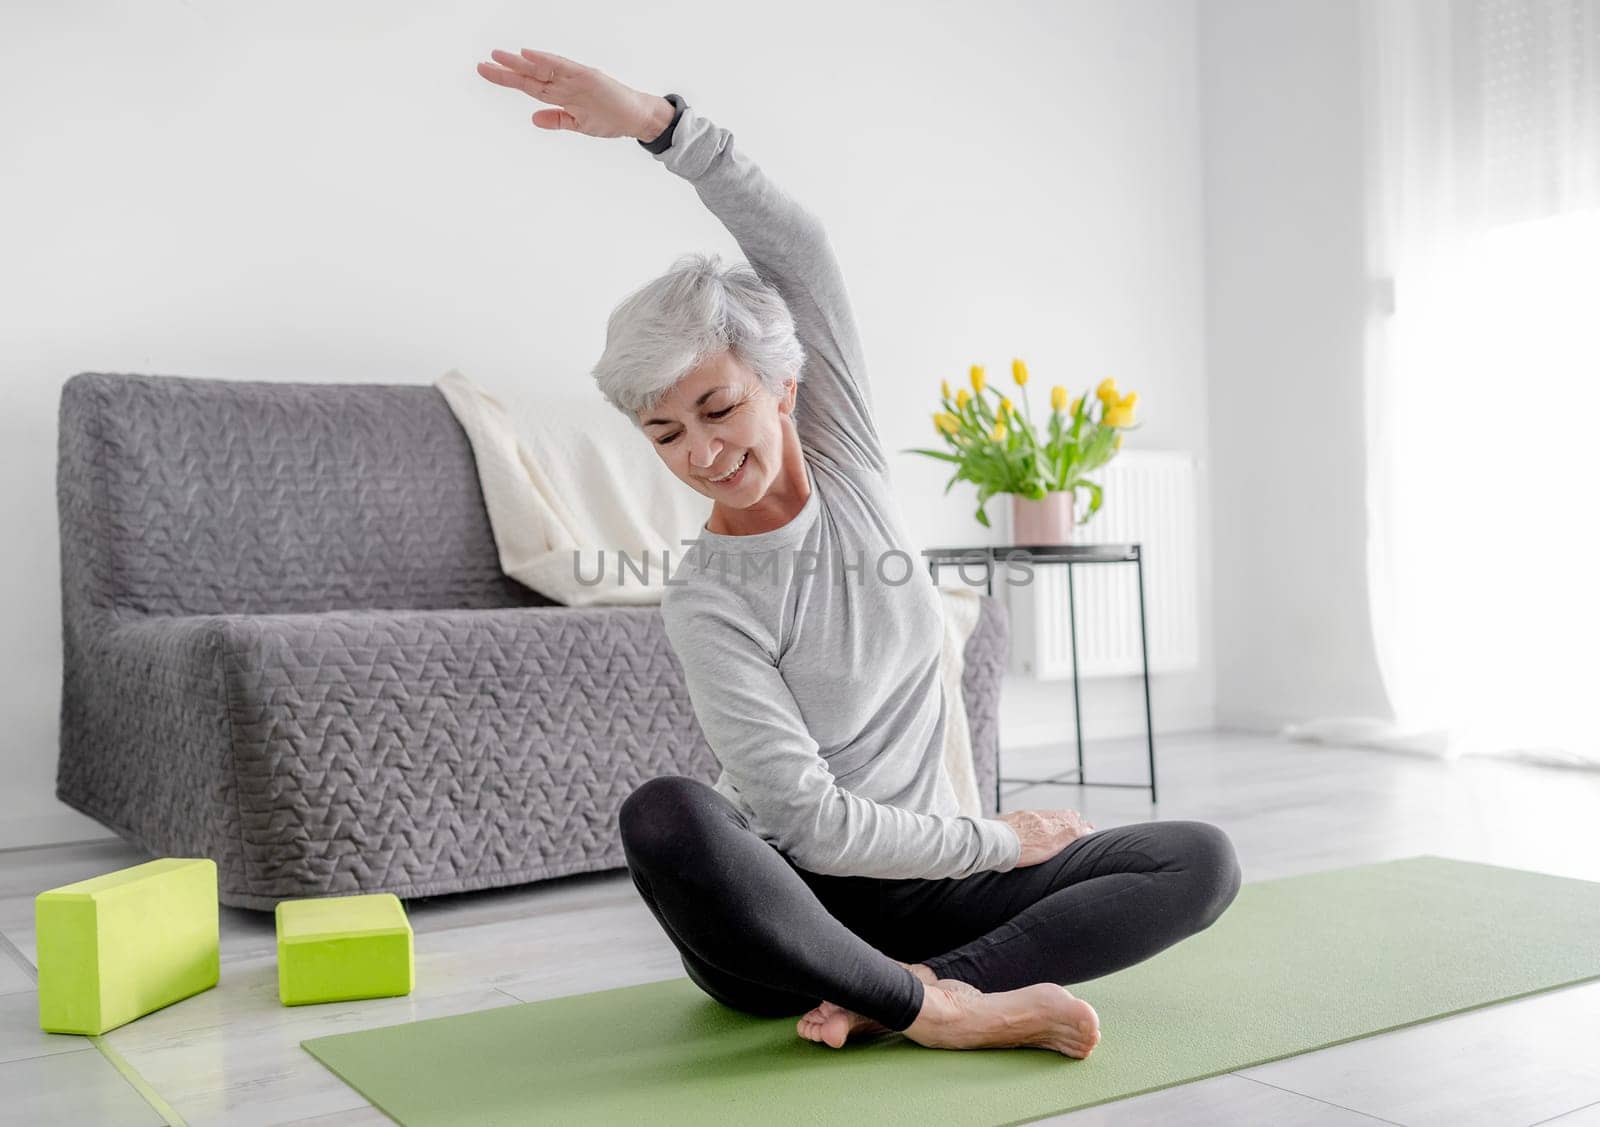 Calm Exercises At Home In A Bright Room by tan4ikk1